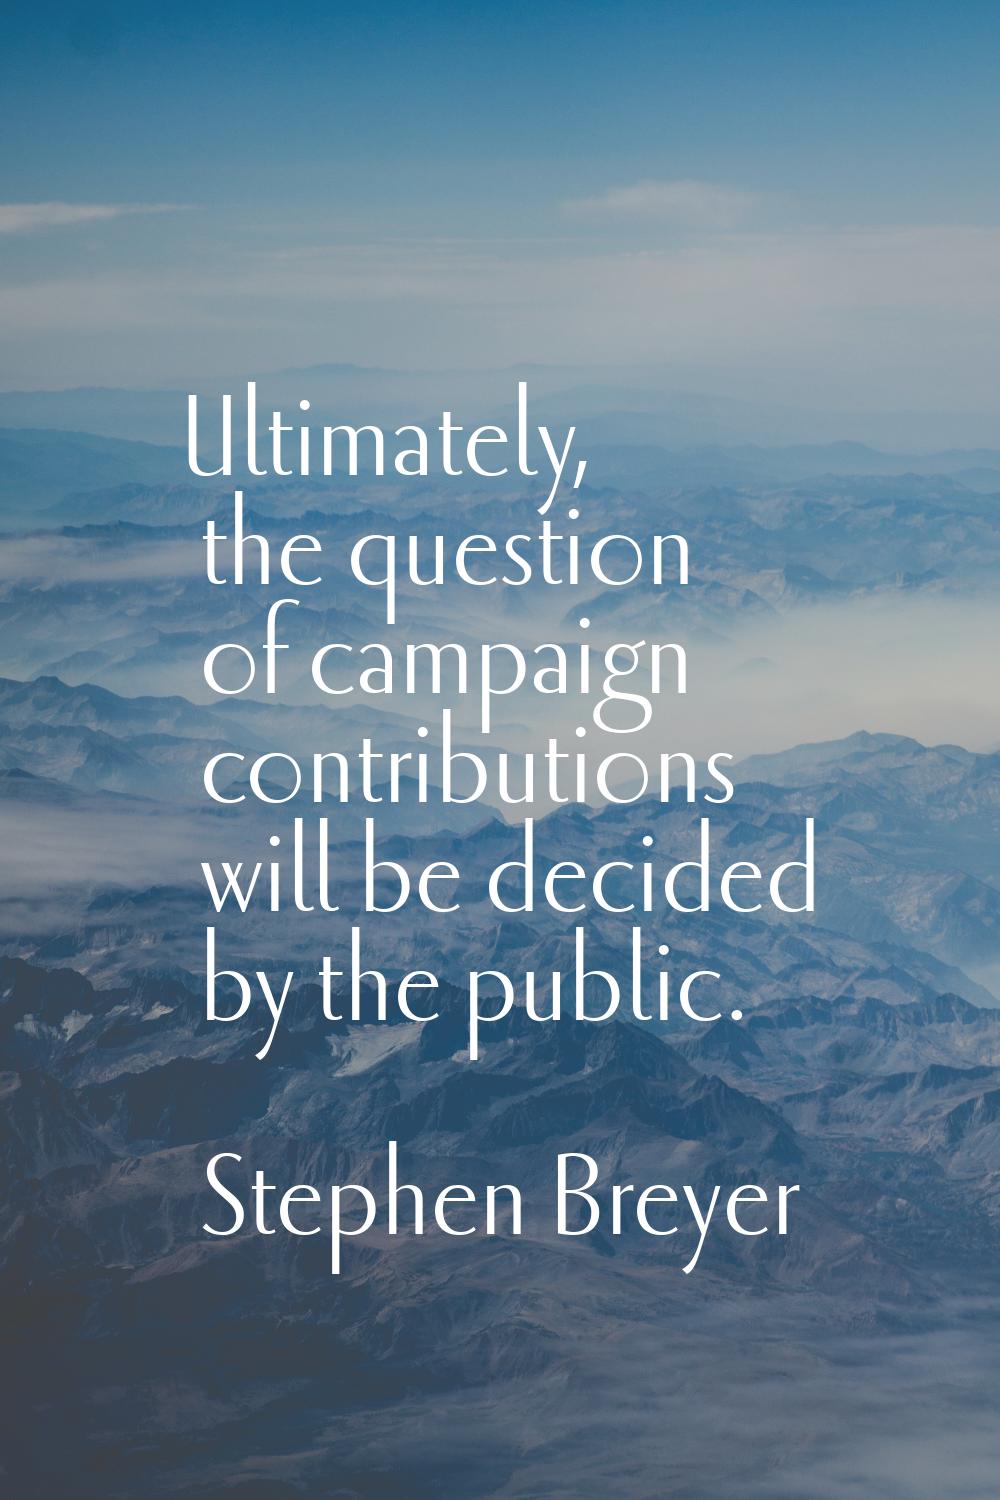 Ultimately, the question of campaign contributions will be decided by the public.